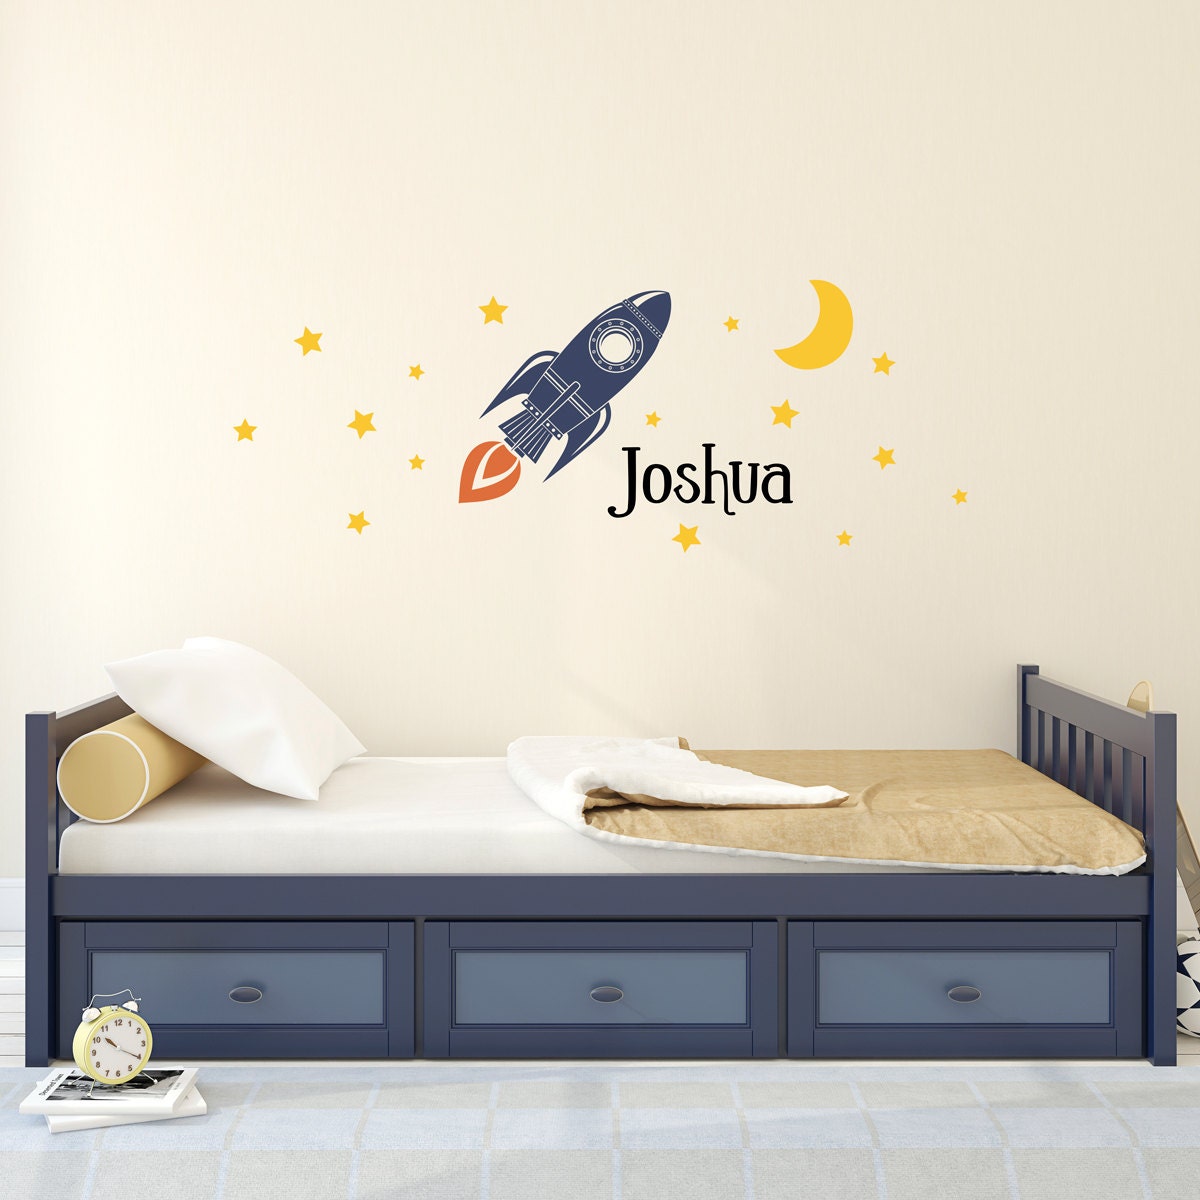 Space Wall Decal - Rocket Decal Set - Boys Name with Moon and Stars Wall Stickers - Bedroom Decor